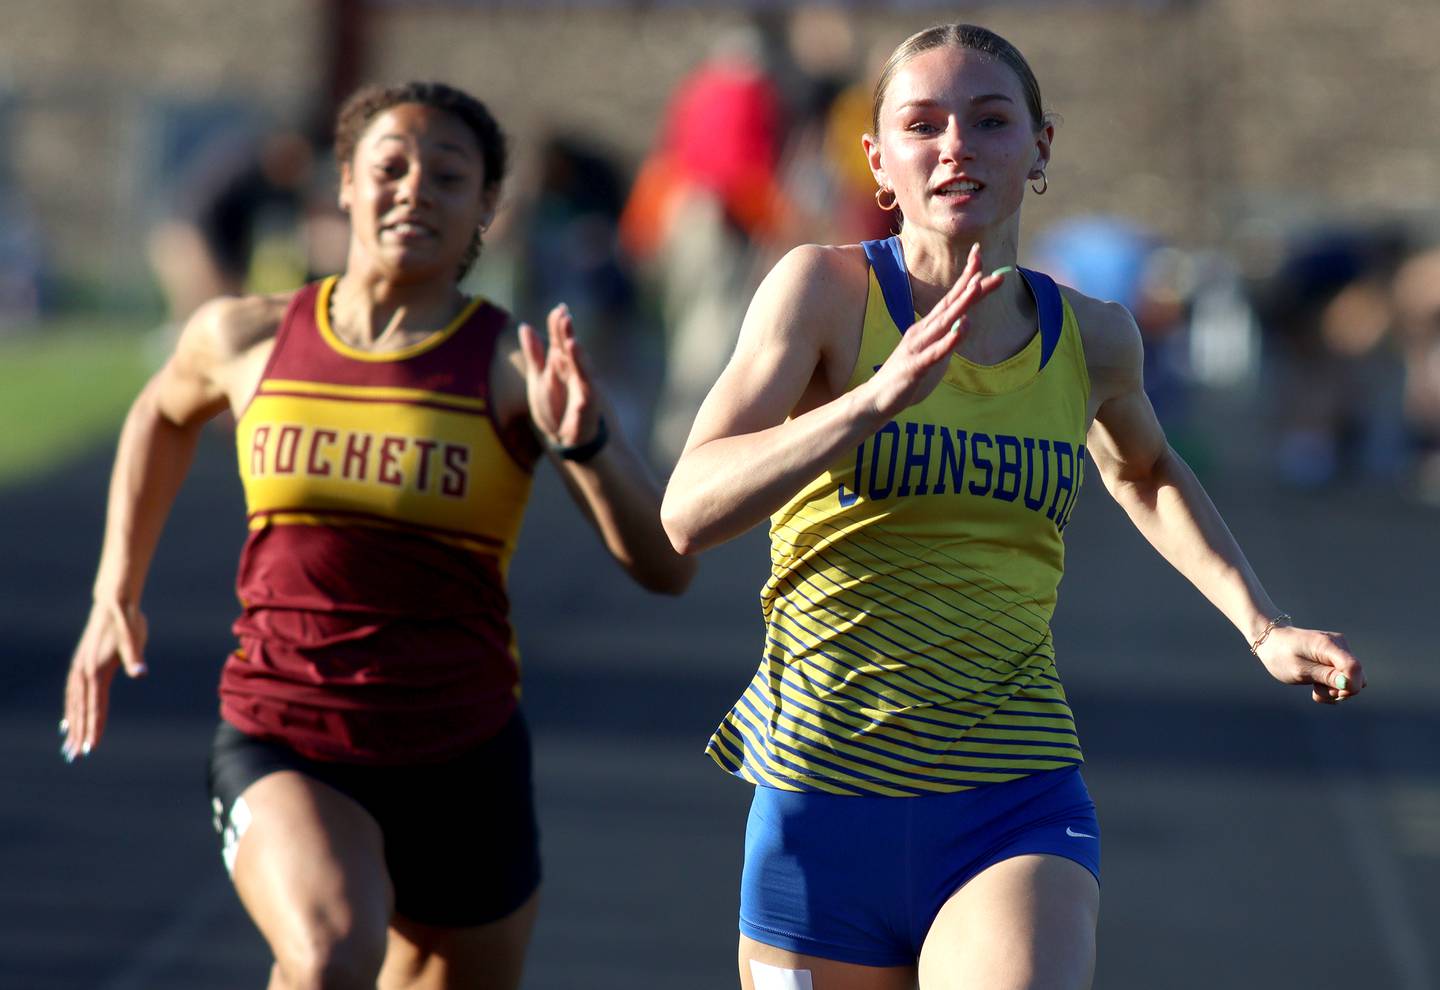 Johnsburg’s Caitlyn Casella, right, cruises to victory in the 100-meter dash as Richmond-Burton’s Jasmine McCaskel pursues during the Kishwaukee River Conference Girls Conference Championships track meet at Harvard High School Tuesday.